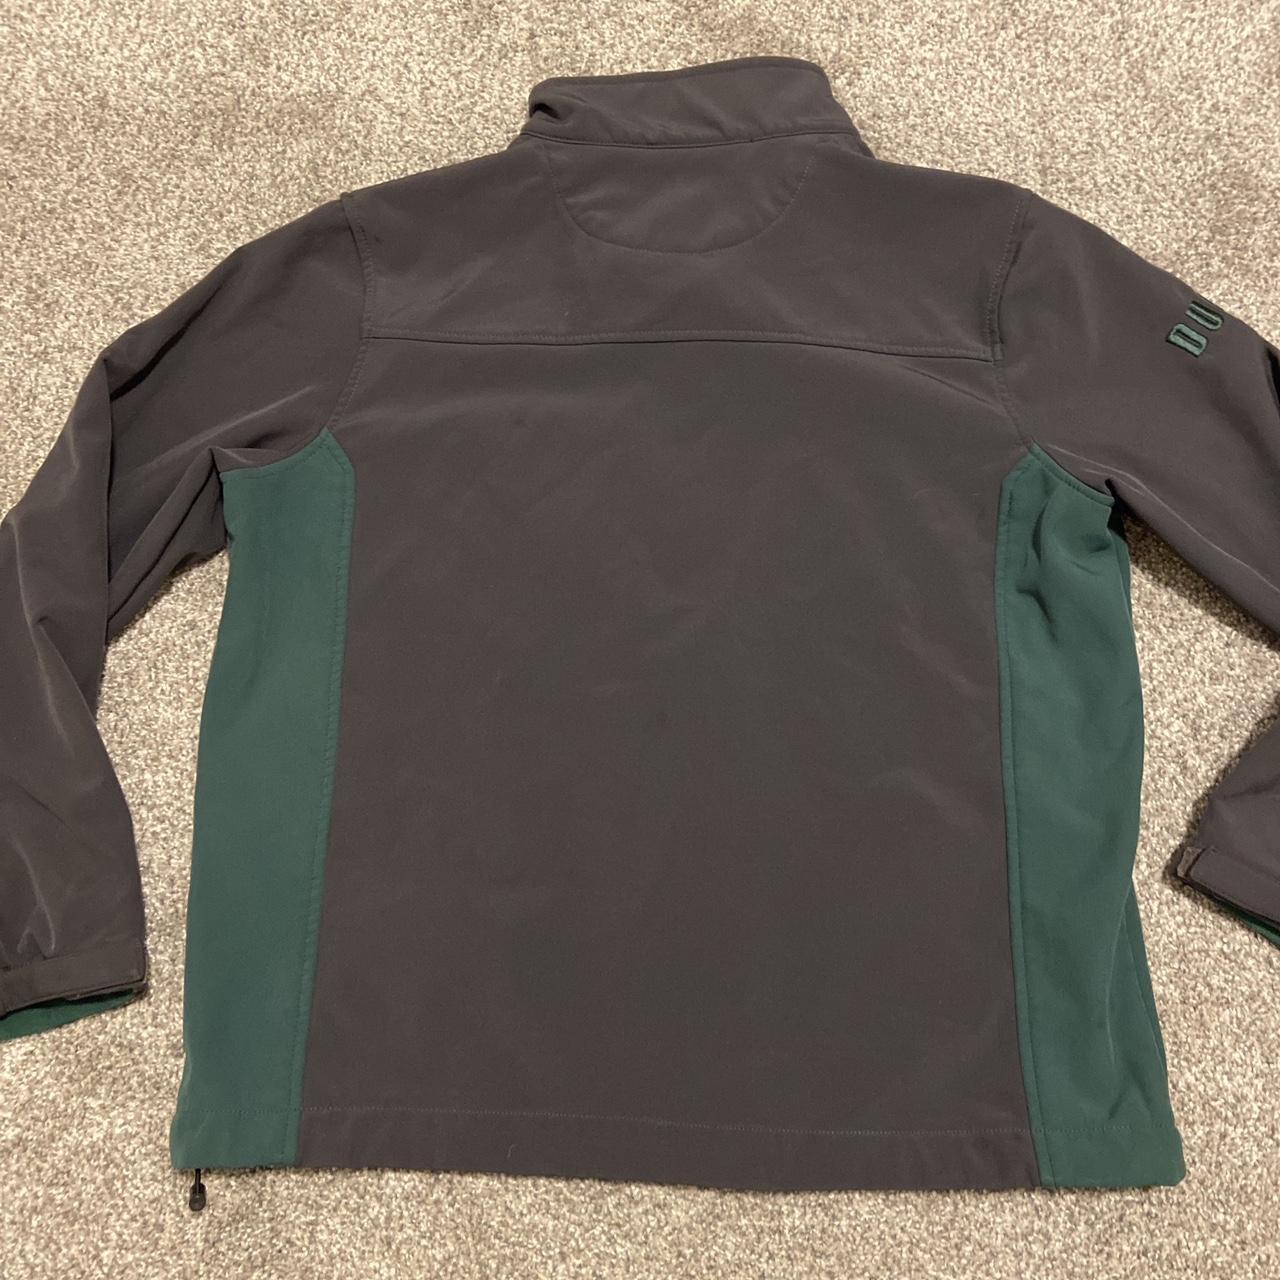 Colosseum Men's Green and Grey Jacket (2)